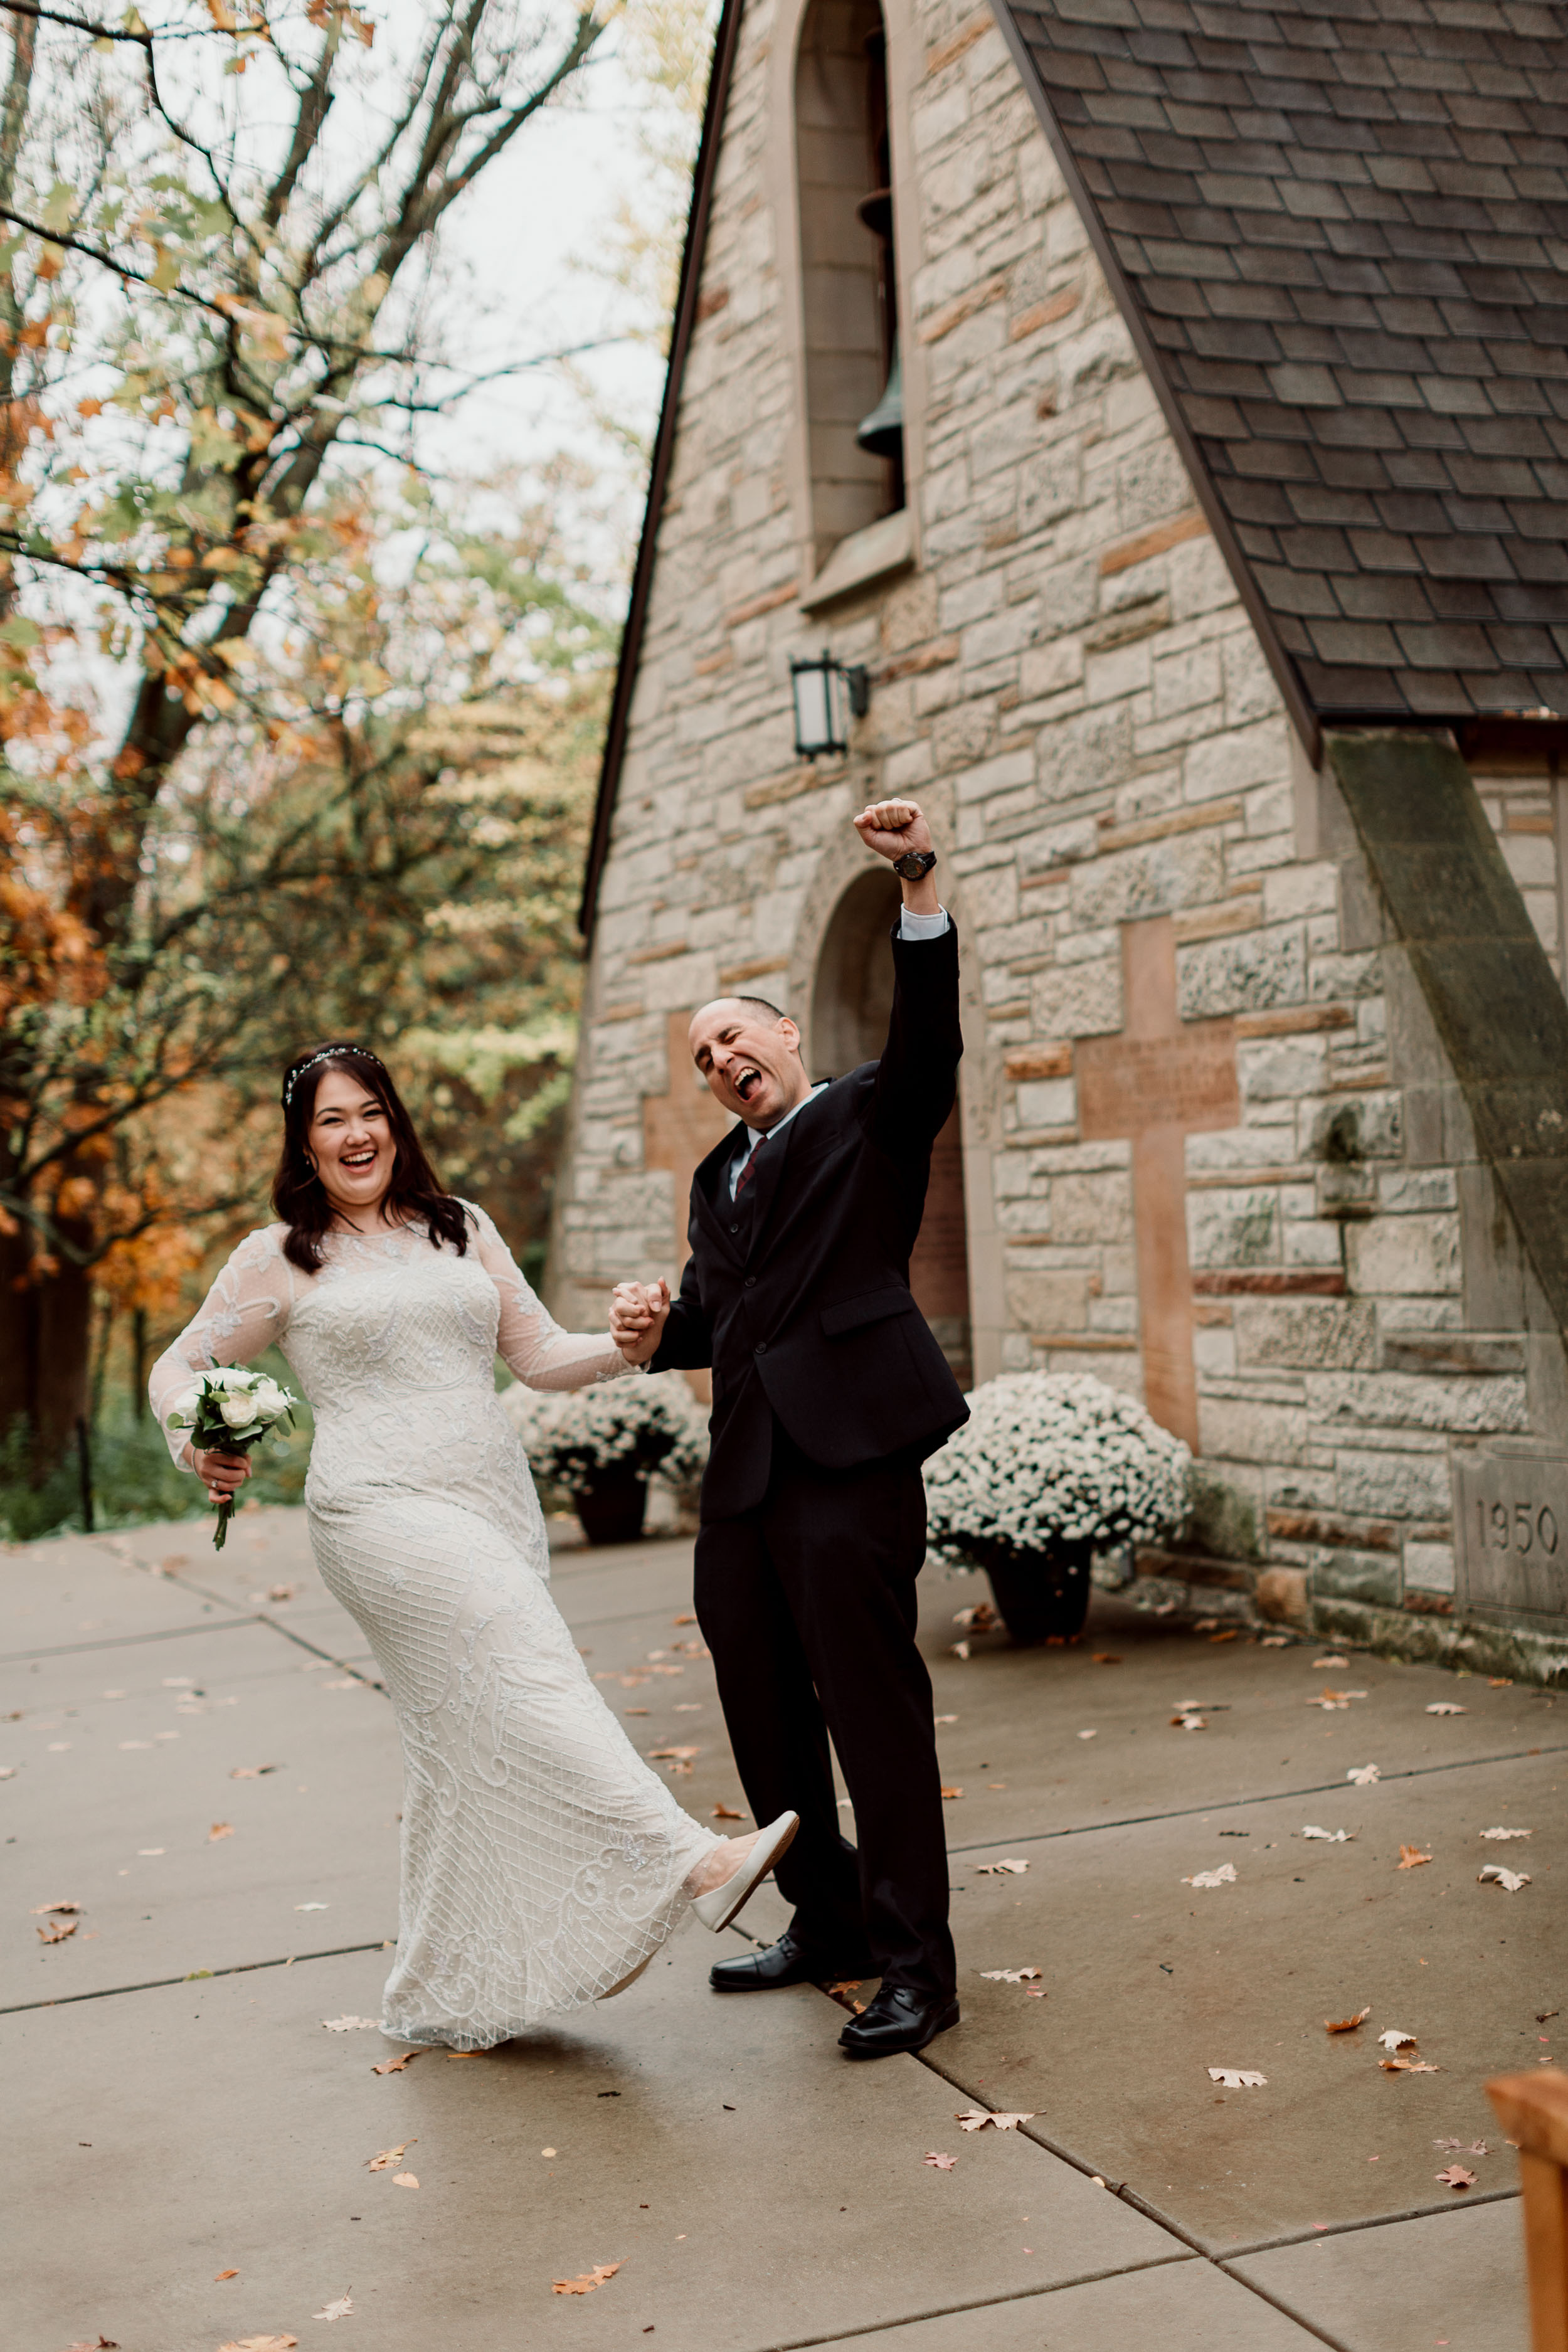 Small Chapel Wedding in the fall | 
Intimate Elopement in Palos Park IL | The Wayside Chapel at The Center Wedding | The Center Garden Wedding | Rainy Fall Wedding | Fall Chicago Wedding | Elopement Photographer Chicago